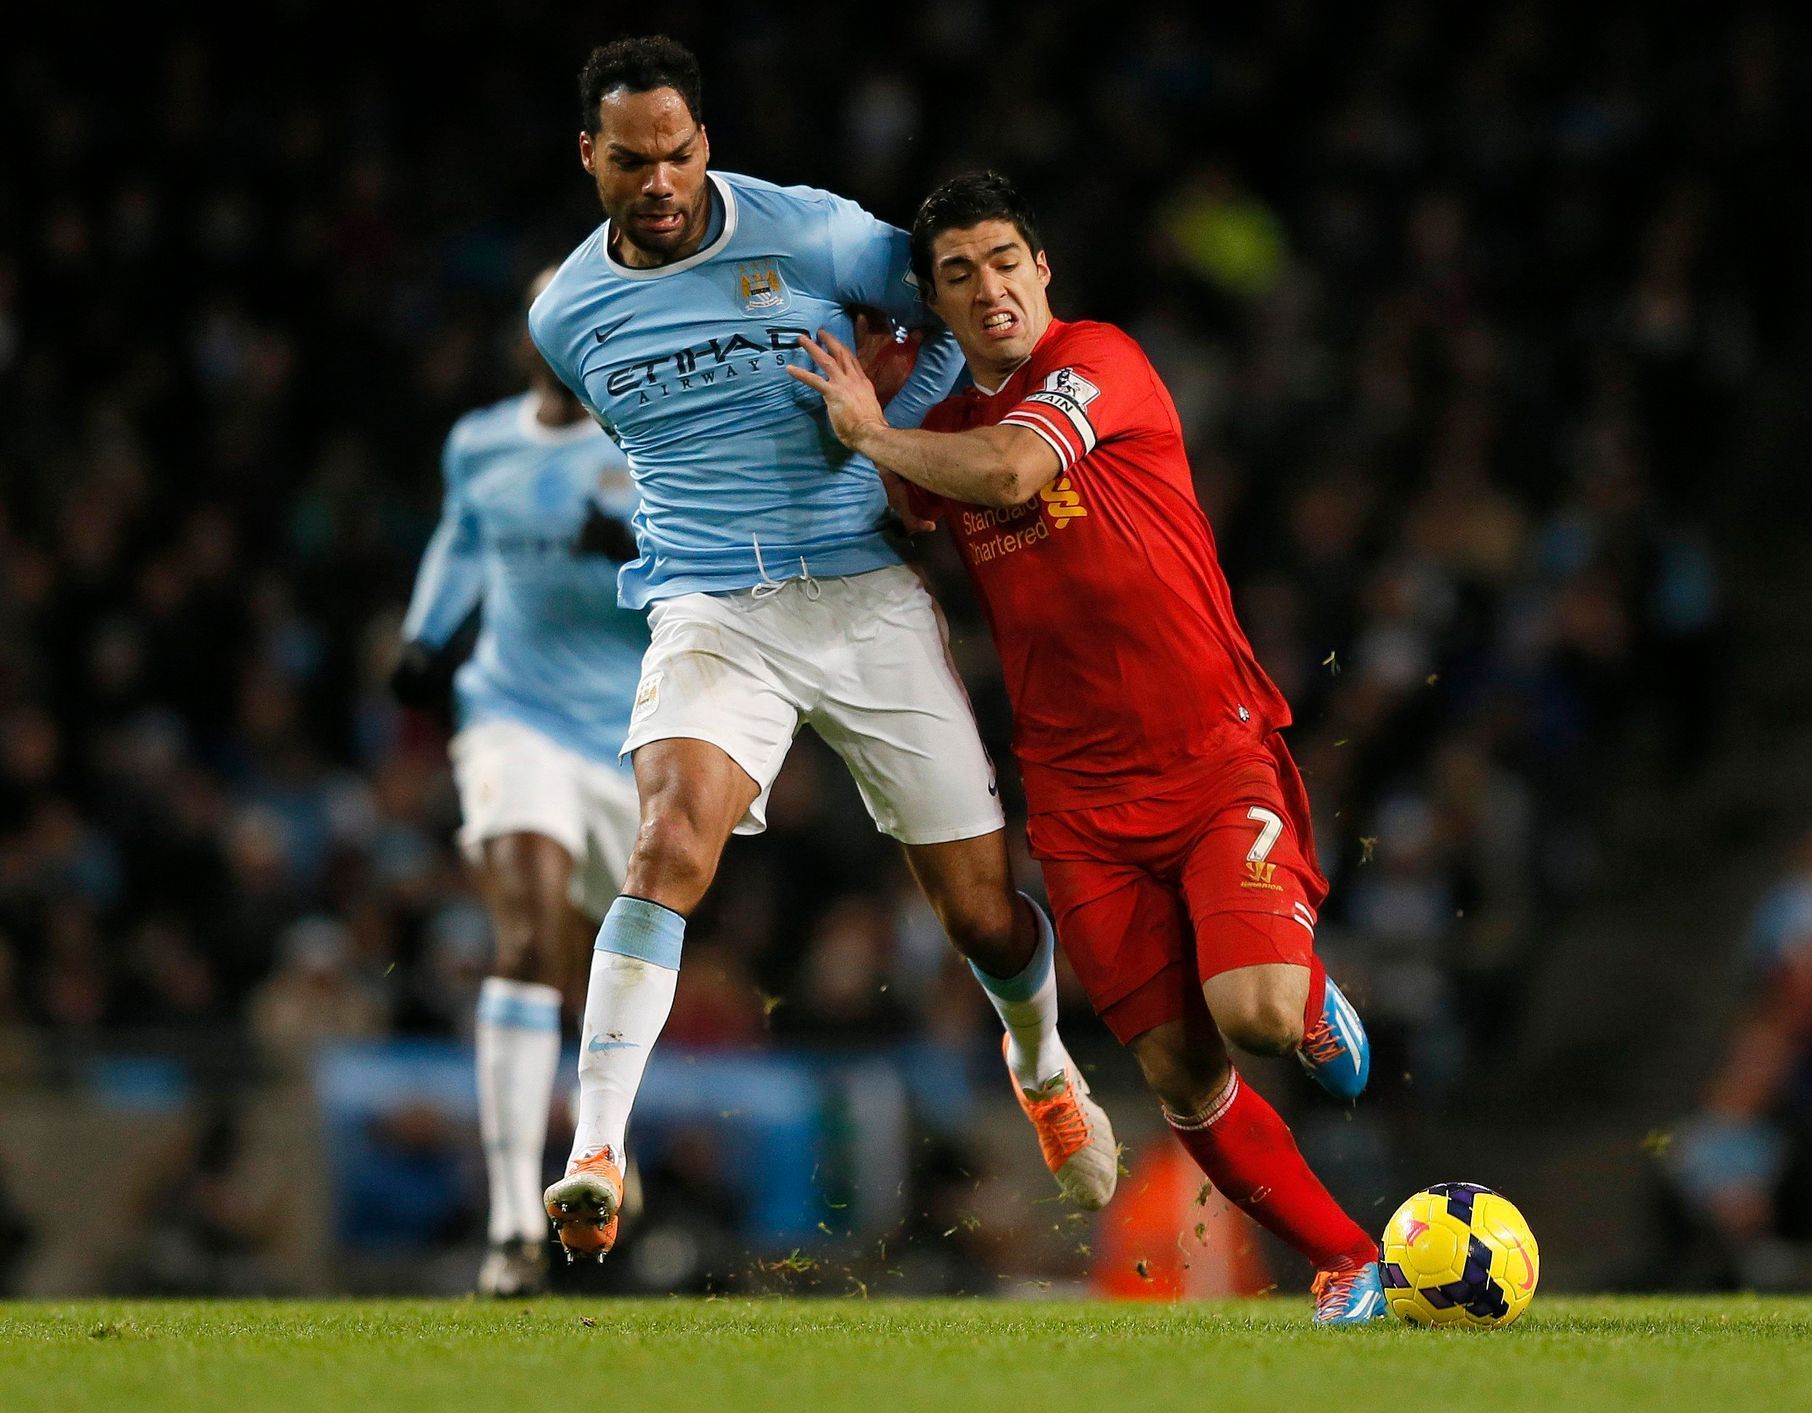 Liverpool's Suarez challenges Manchester City's Lescott  during their English Premier League soccer match at the Etihad stadium in Manchester